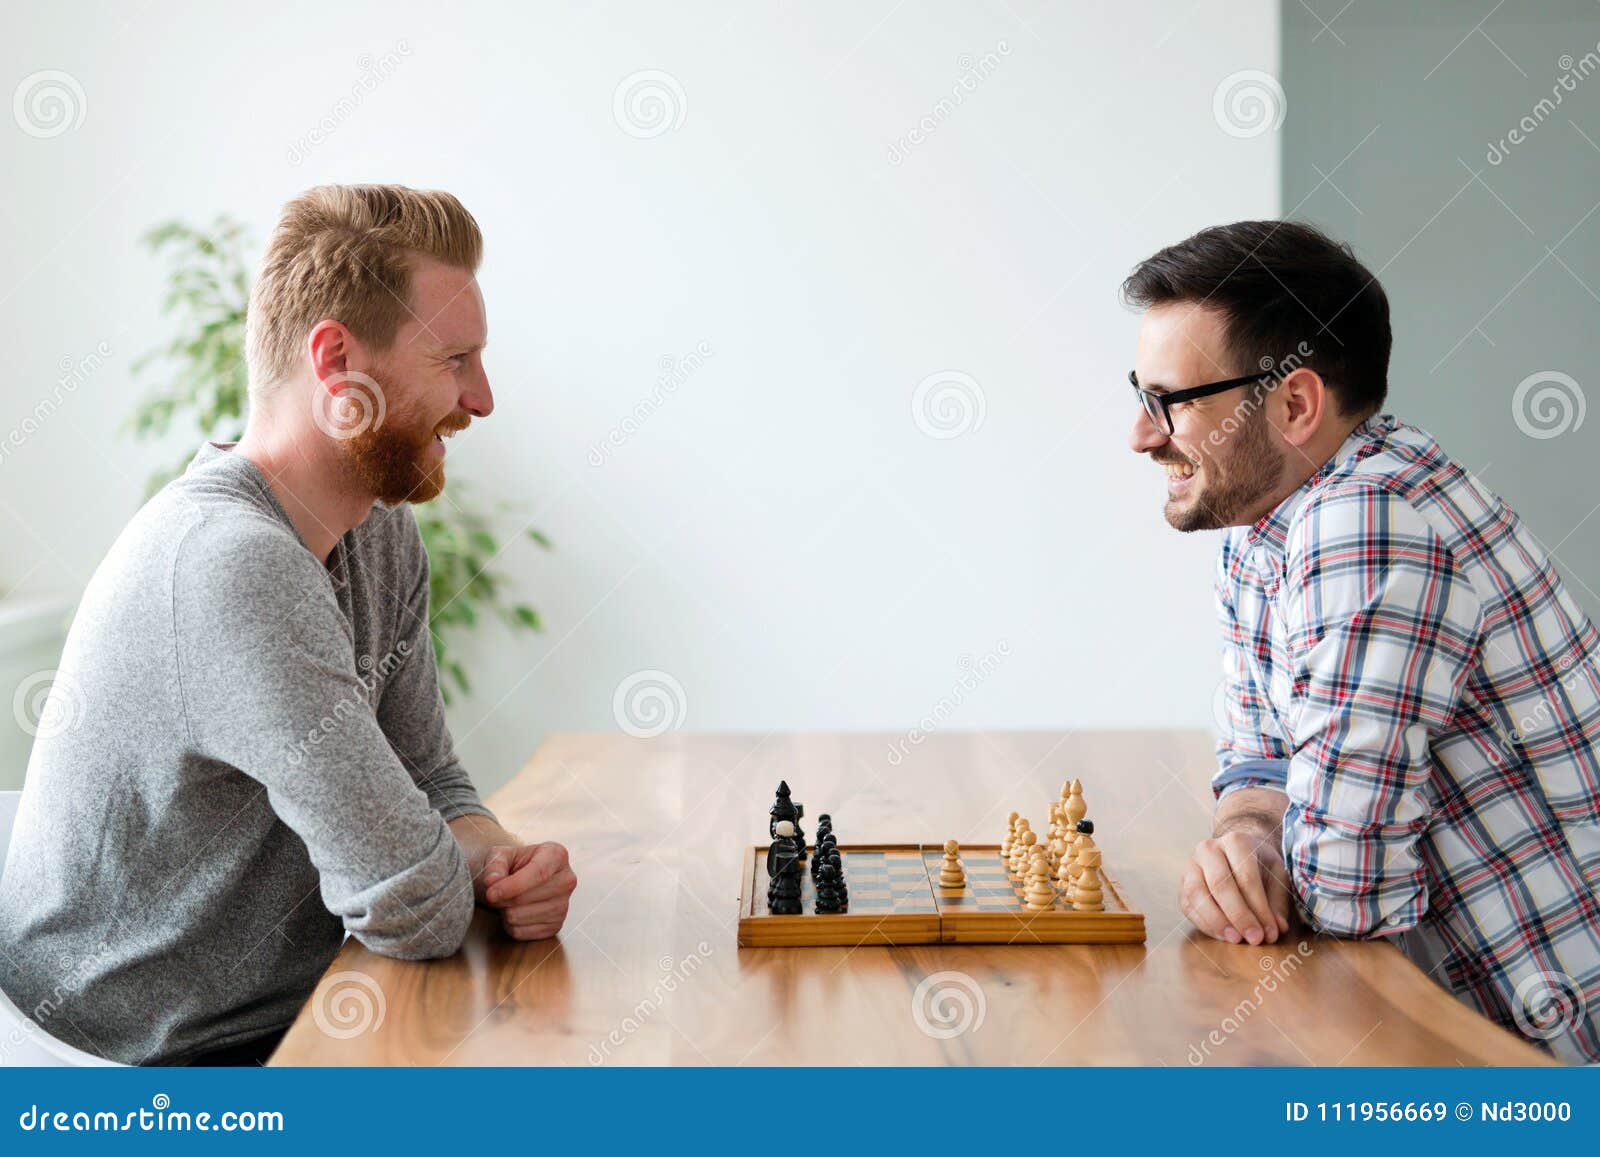 Premium Photo  Two young man are playing chess